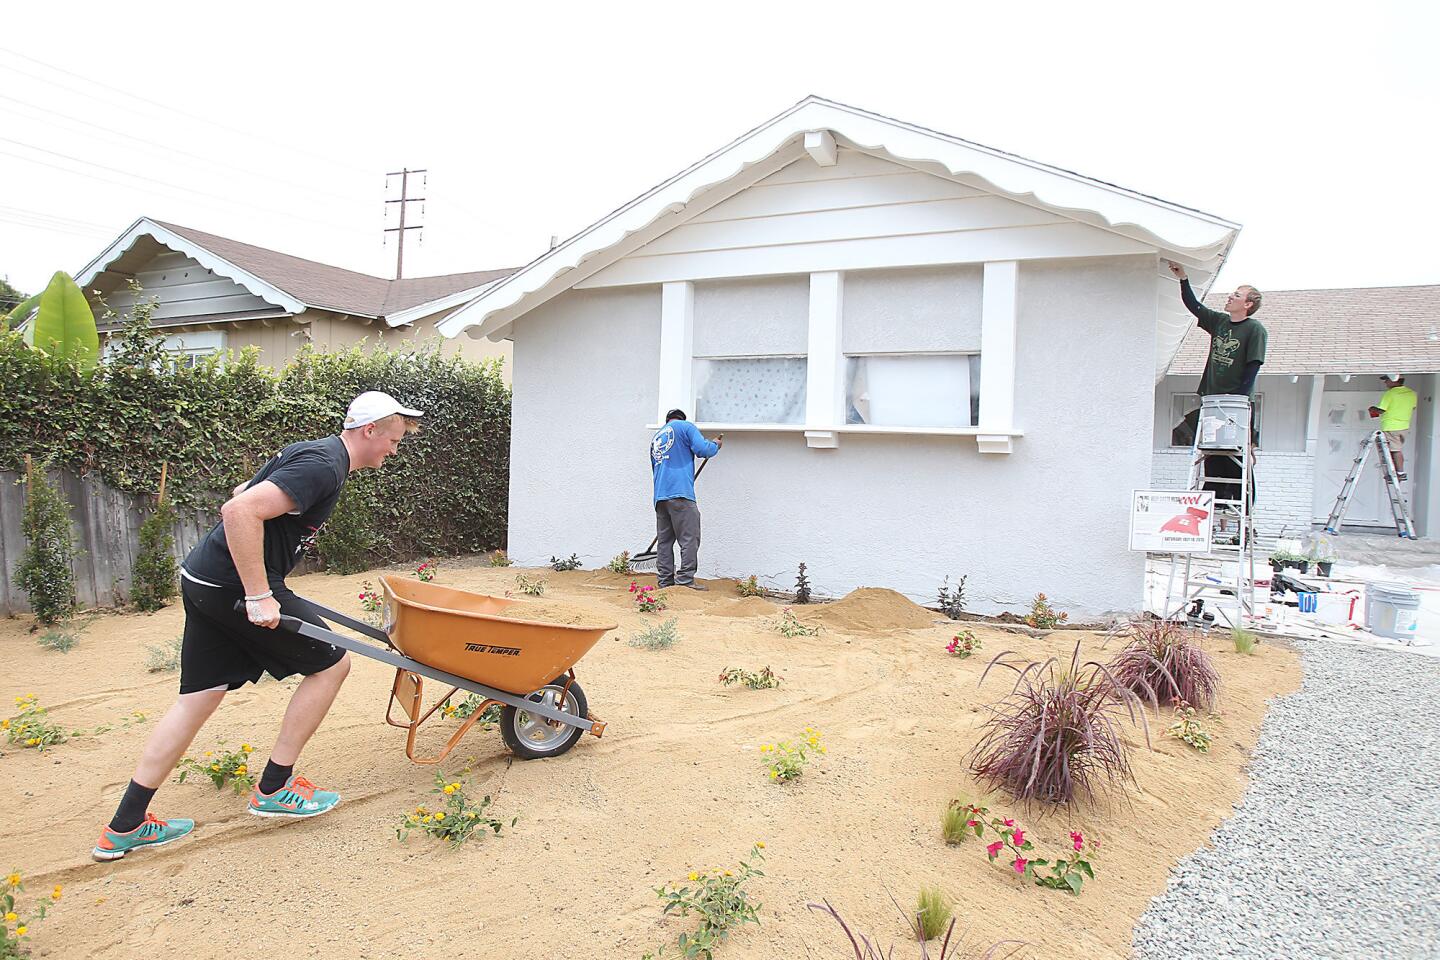 Volunteer John Gough hauls a load of dirt material to the front yard of a home on Raleigh Ave. during Neighbors Helping Neighbors charity event in Costa Mesa on Saturday. The program, organized by Mayor Steve Mensinger, uses private donations and volunteer labor from nine congregations from The Church of Jesus Christ of Latter-day Saints in Newport Beach and Costa Mesa to paint and fix up the homes.